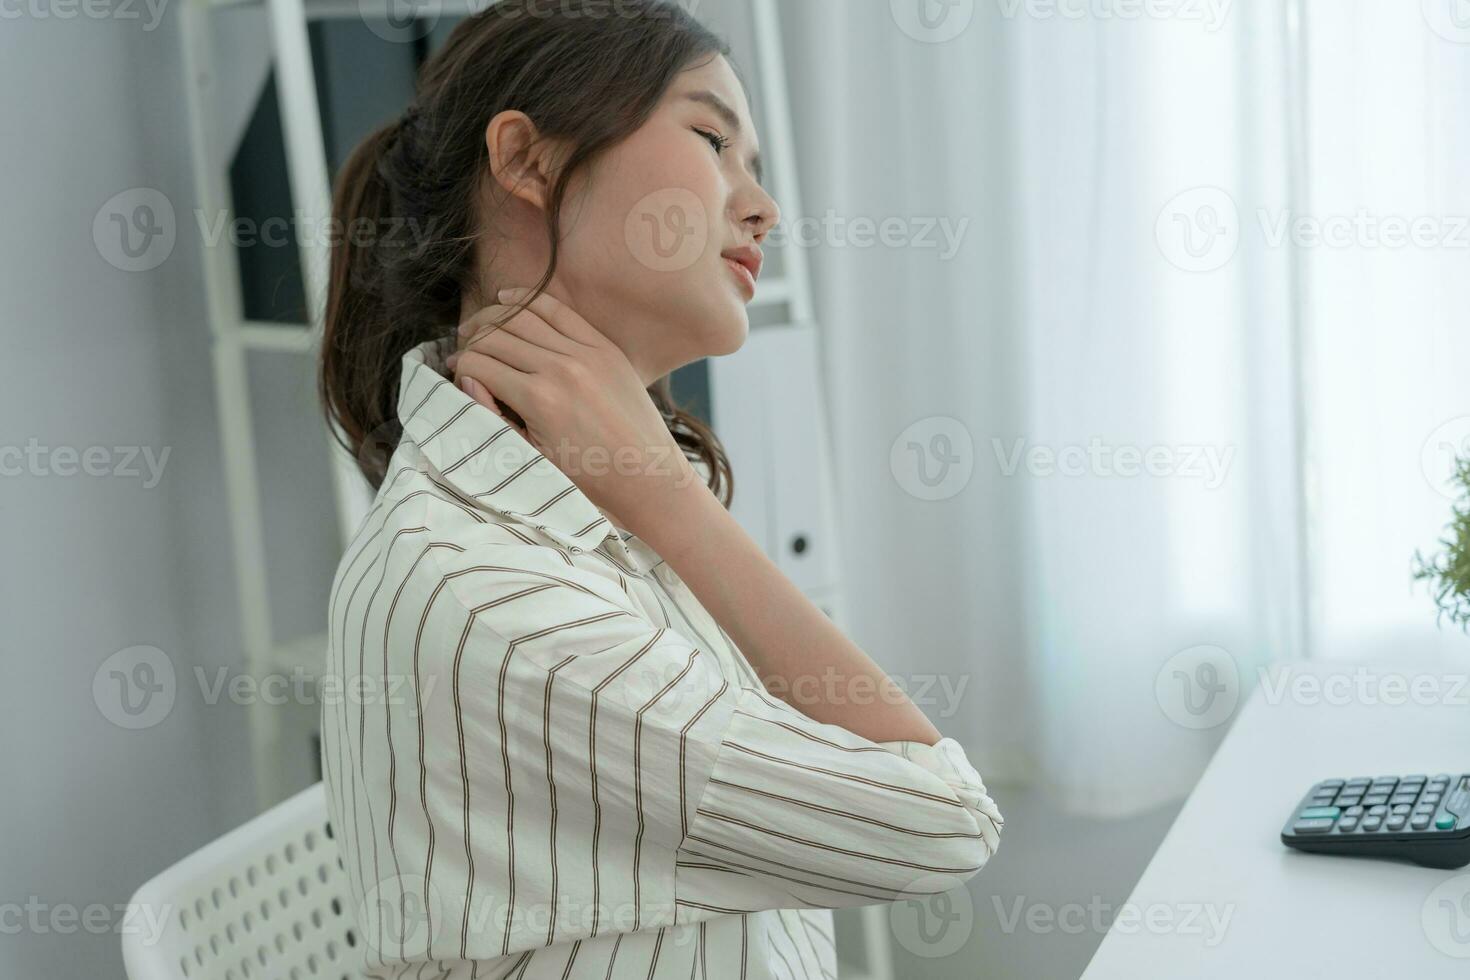 office syndromes, woman massaging neck pain due to work and using a computer, digital composite of a focused spine of neck pain and shoulder pain symptoms , injuries, health care, medical, myositis photo